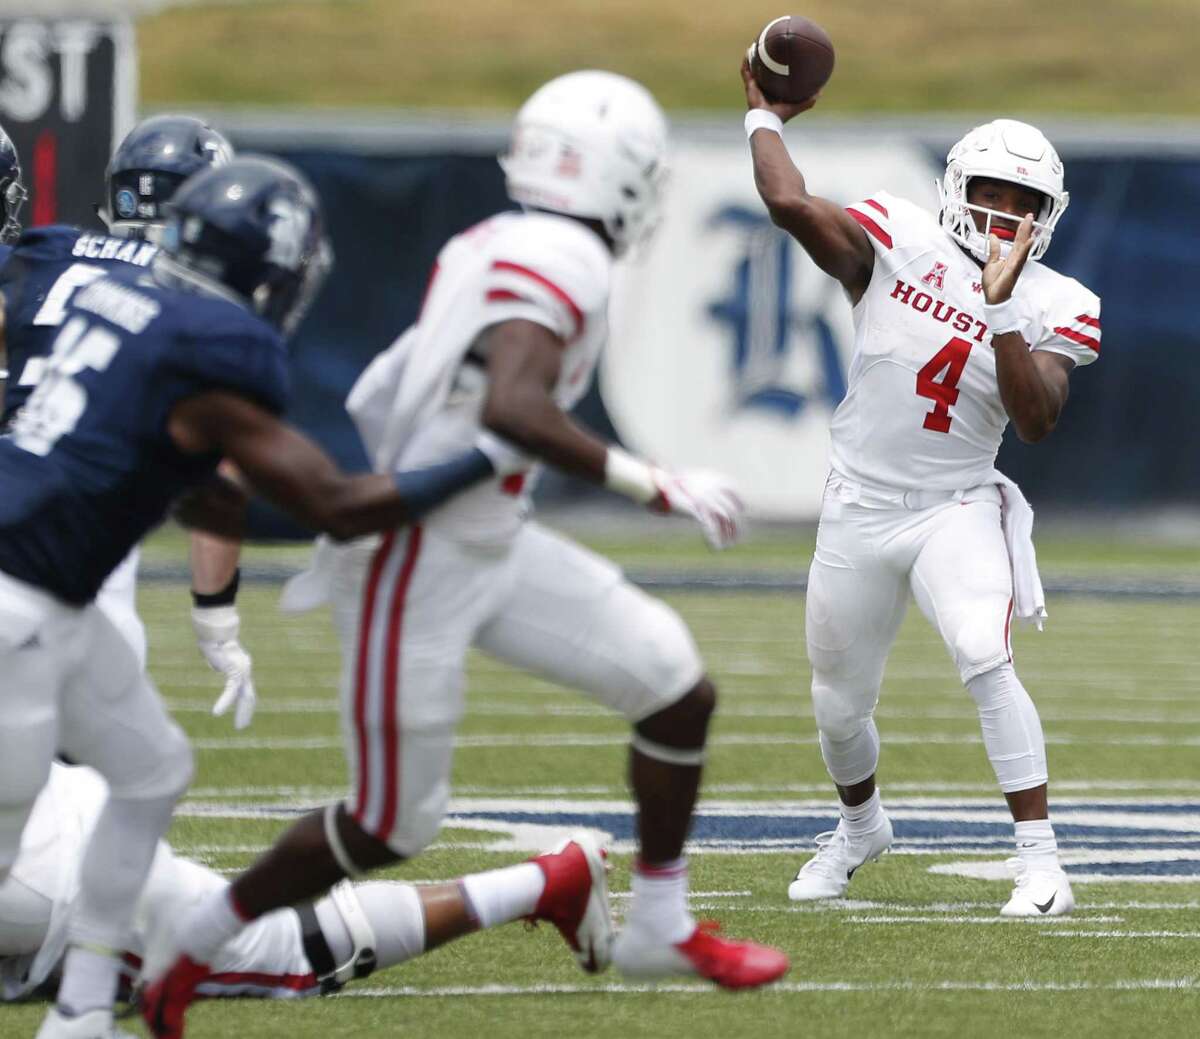 Houston quarterback D'Eriq King (4) throws a pass against Rice during the fourth quarter of an NCAA football game at Rice Stadium on Saturday, Sept. 1, 2018, in Houston.